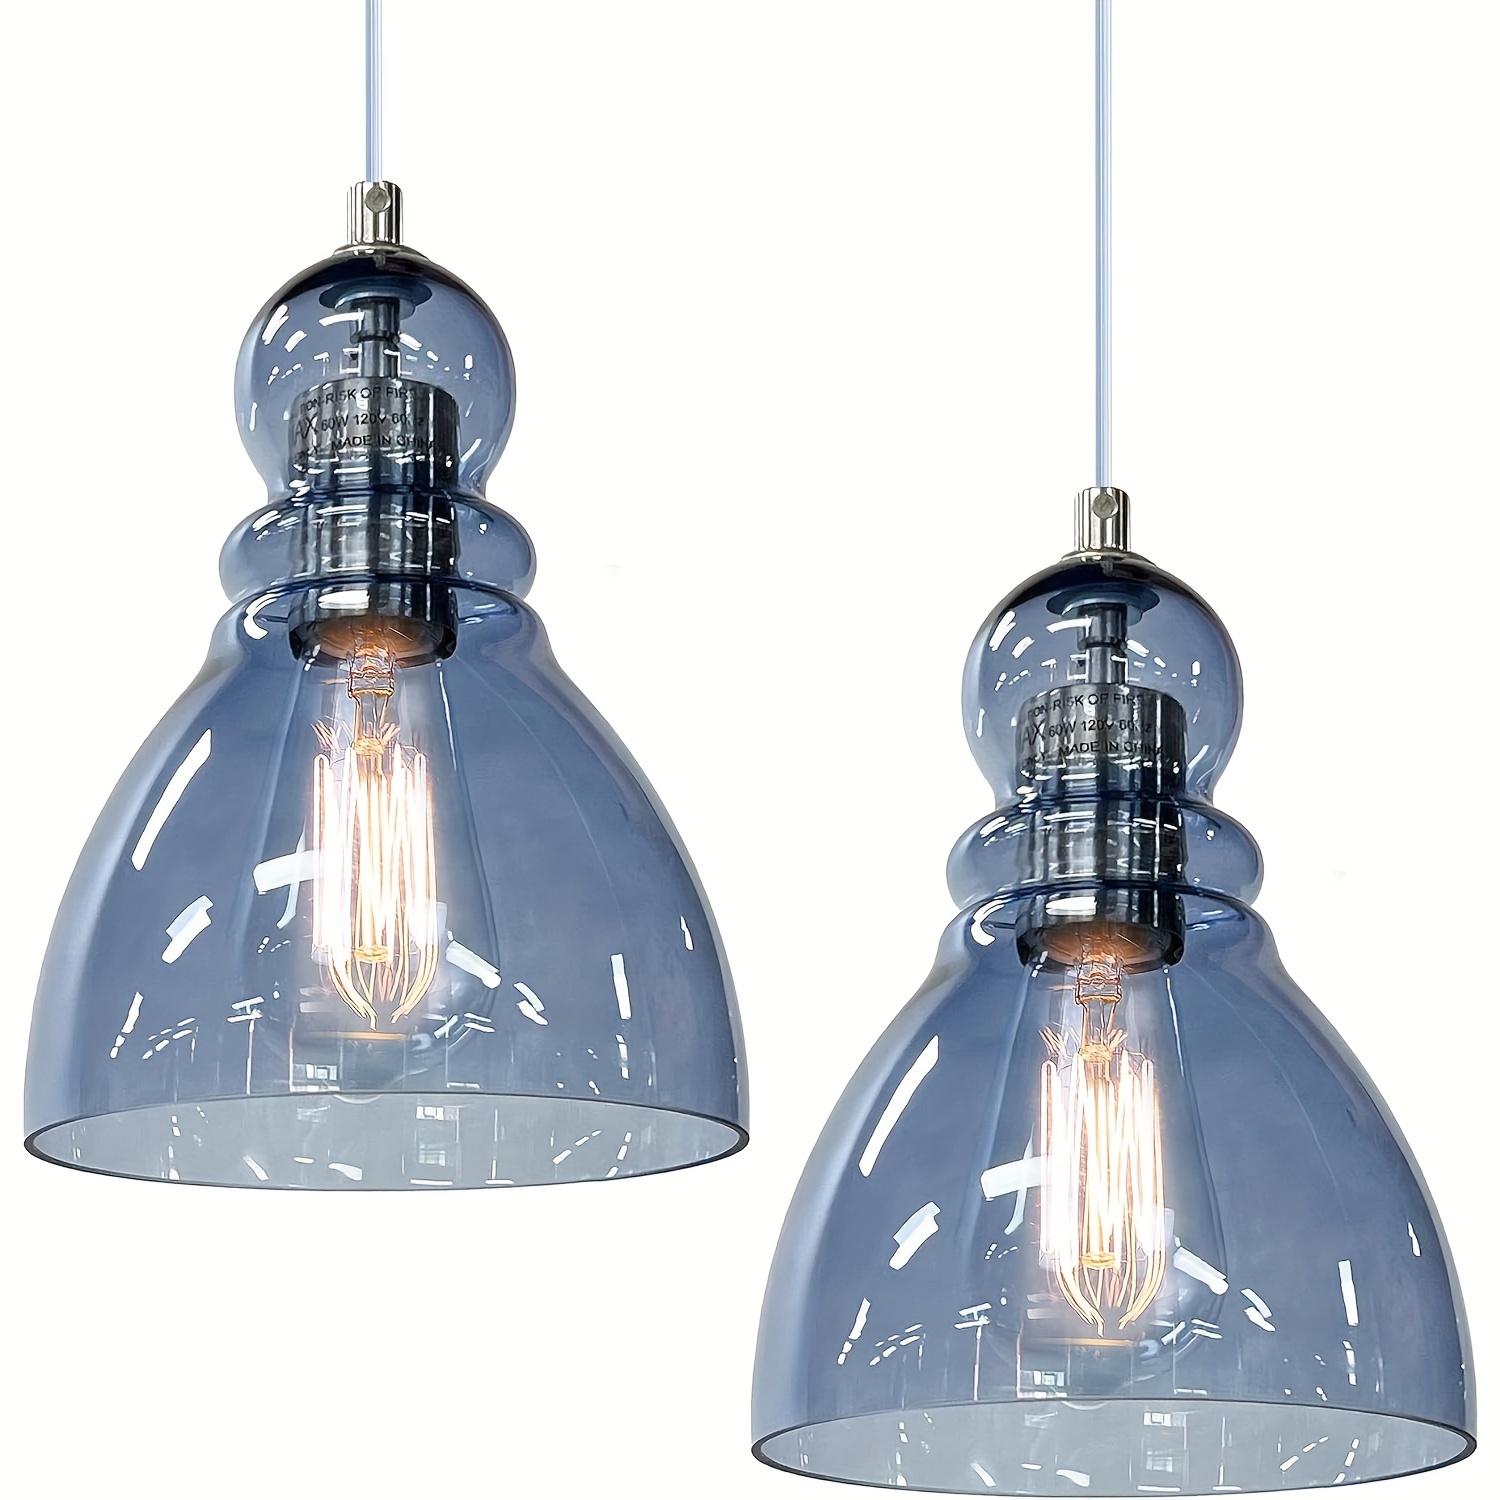 

Blue Glass Pendant Lights For Kitchen Island: Modern Industrial Hanging Ceiling Light Fixture With 6.5'' Handblown Clear Glass Shade For Farmhouse Bedroom Dining Room Sink Bar 2 Packs